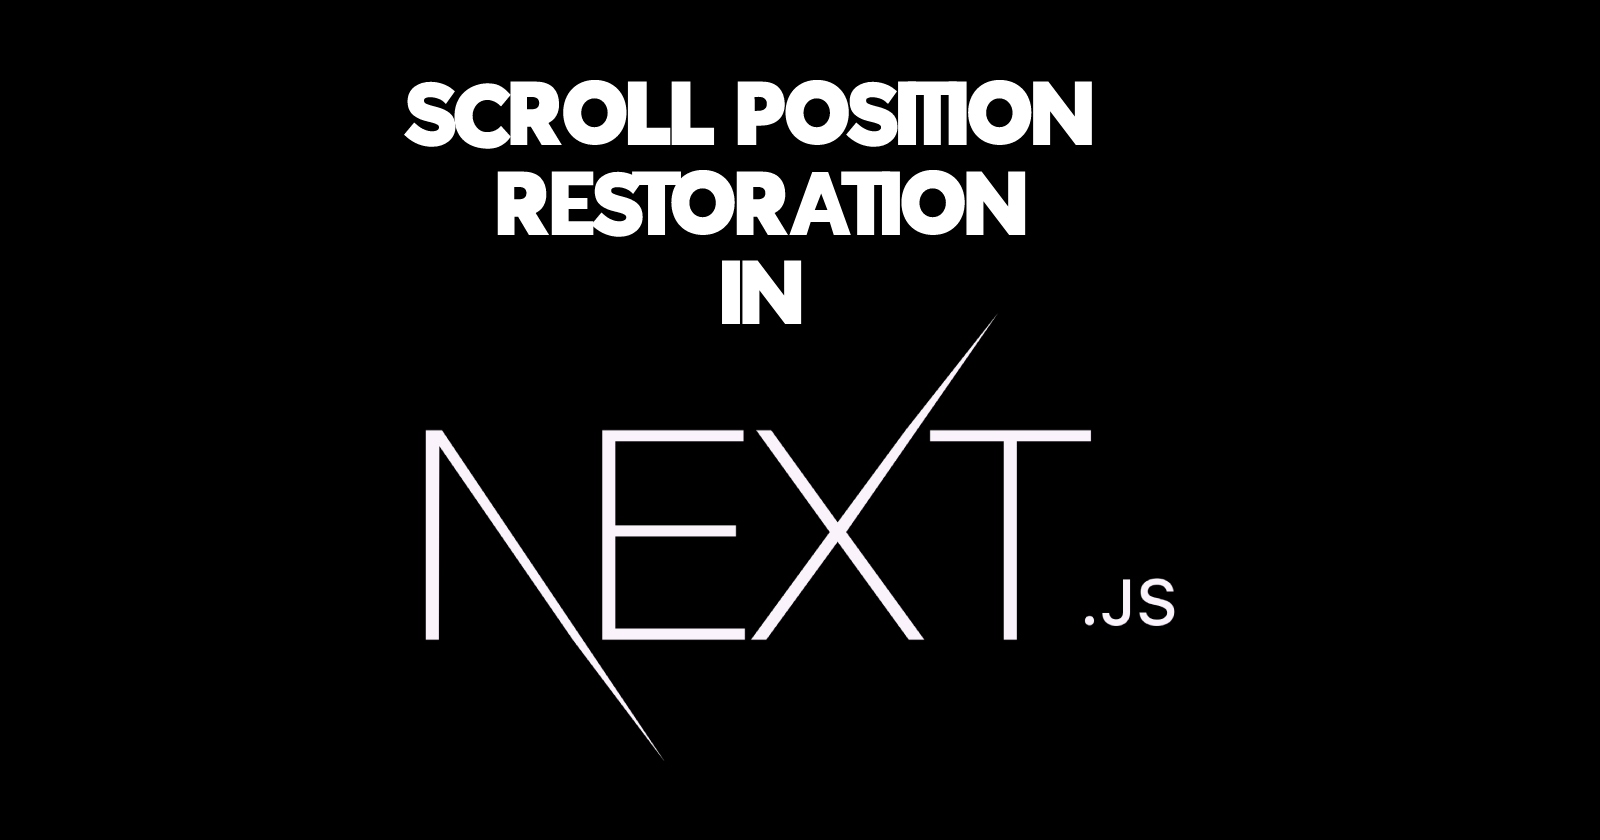 How to restore the scroll position in NextJS?